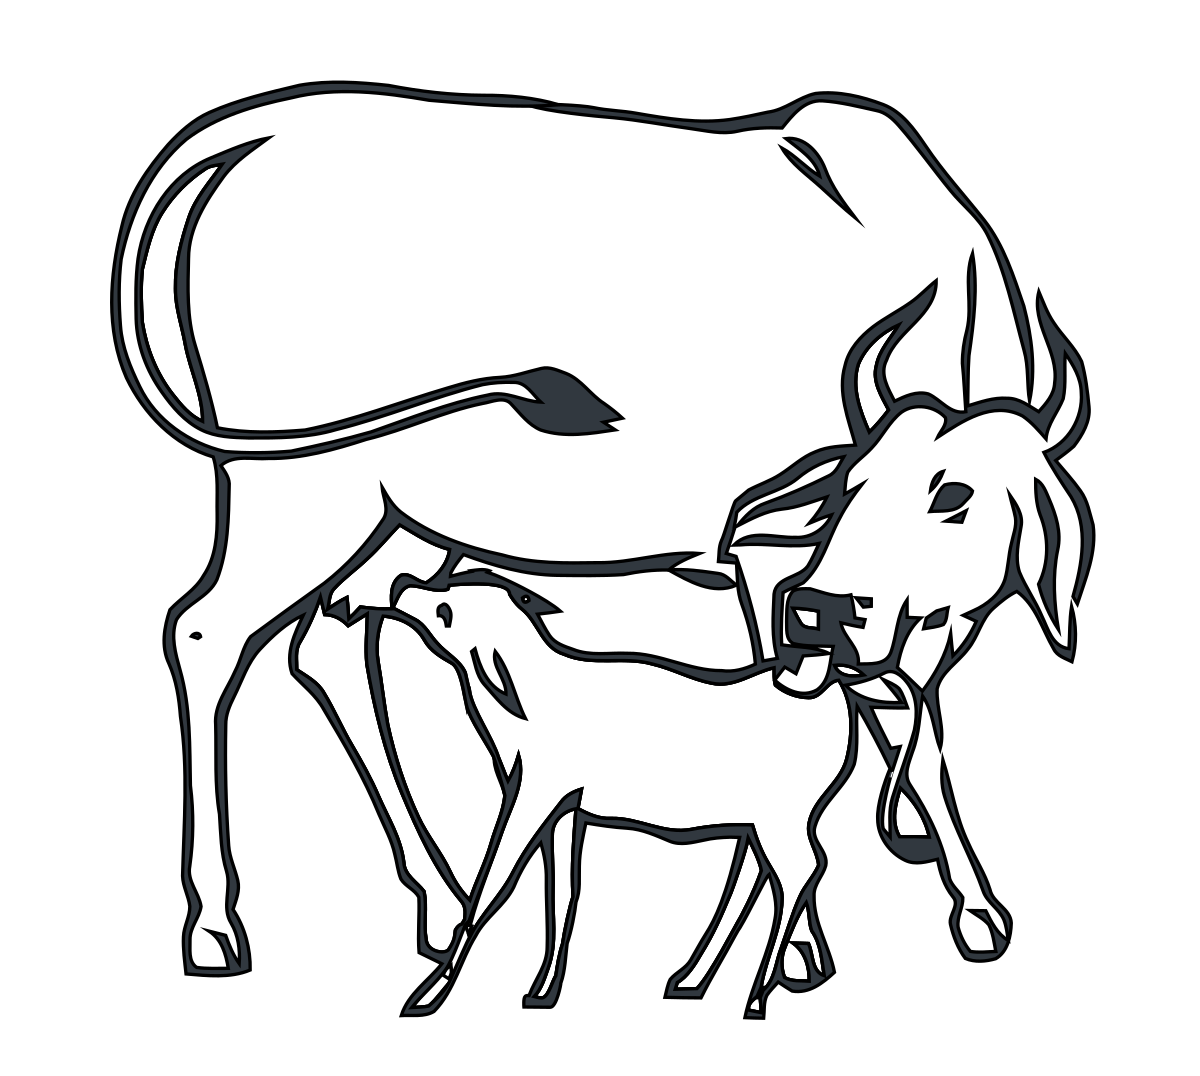 Cow Coloring Pages - Free & Printable!